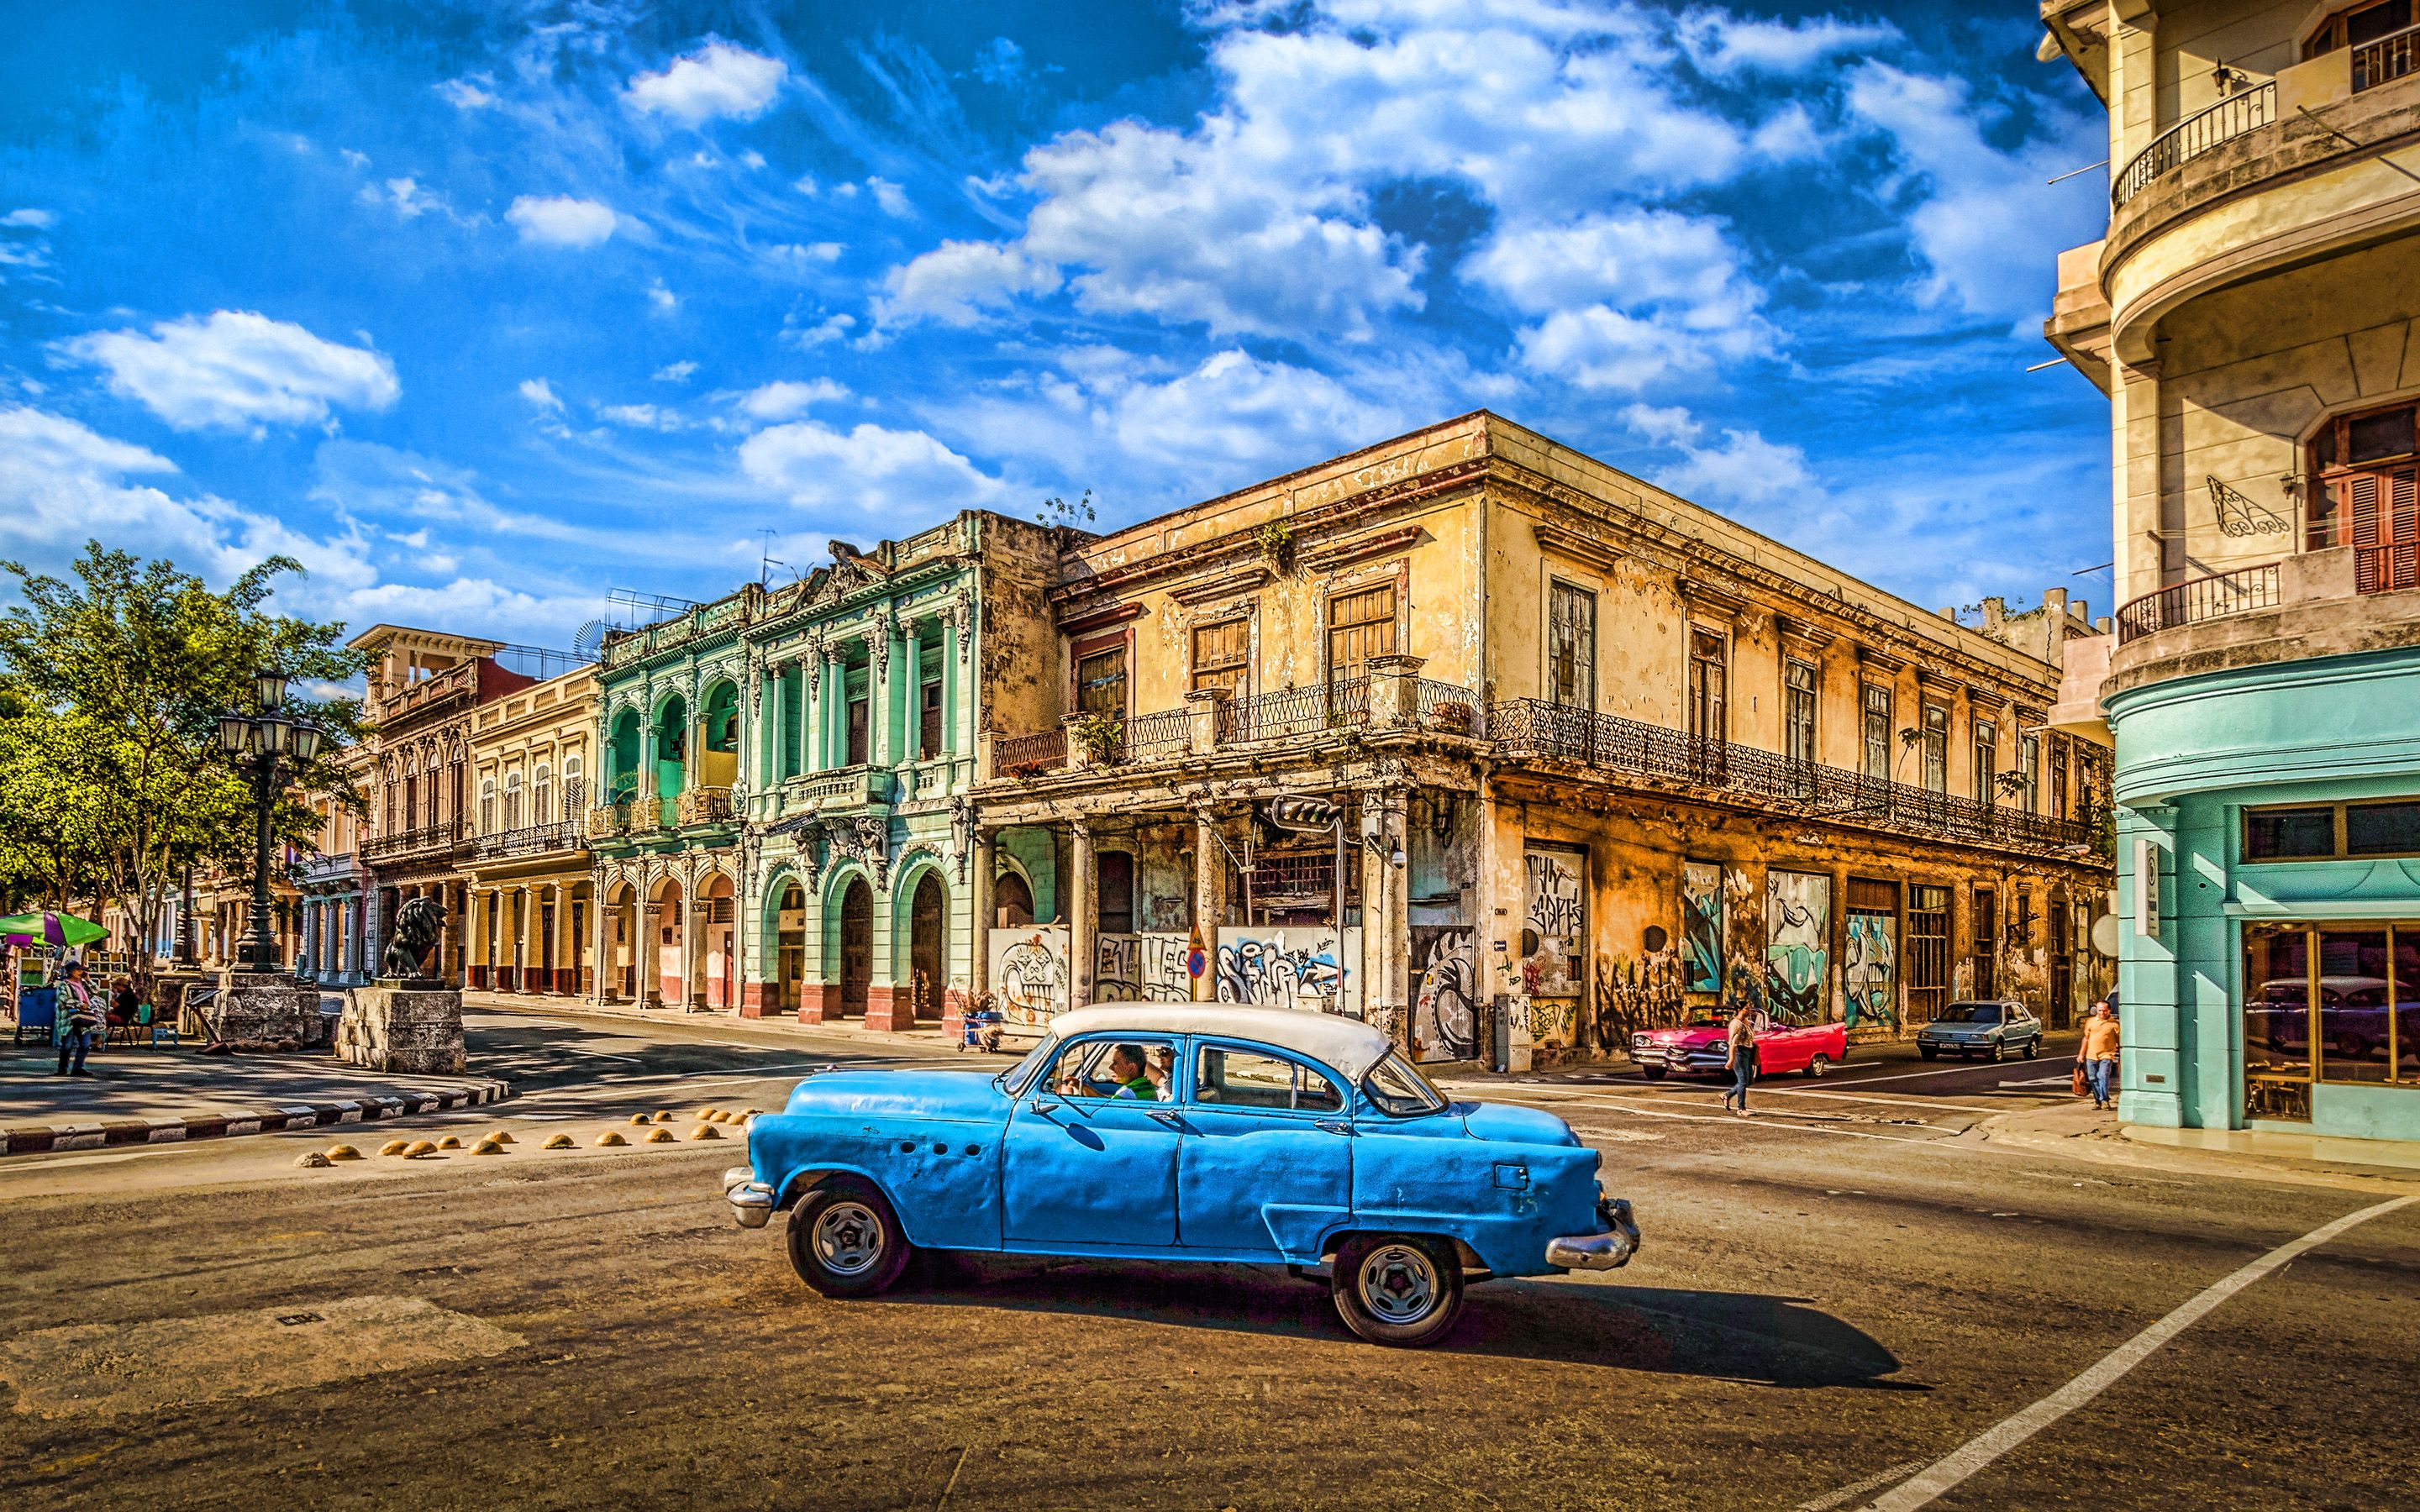 Download wallpaper Havana, 4k, streets, cuban cities, blue car, HDR, Cuba, cityscapes for desktop with resolution 2880x1800. High Quality HD picture wallpaper